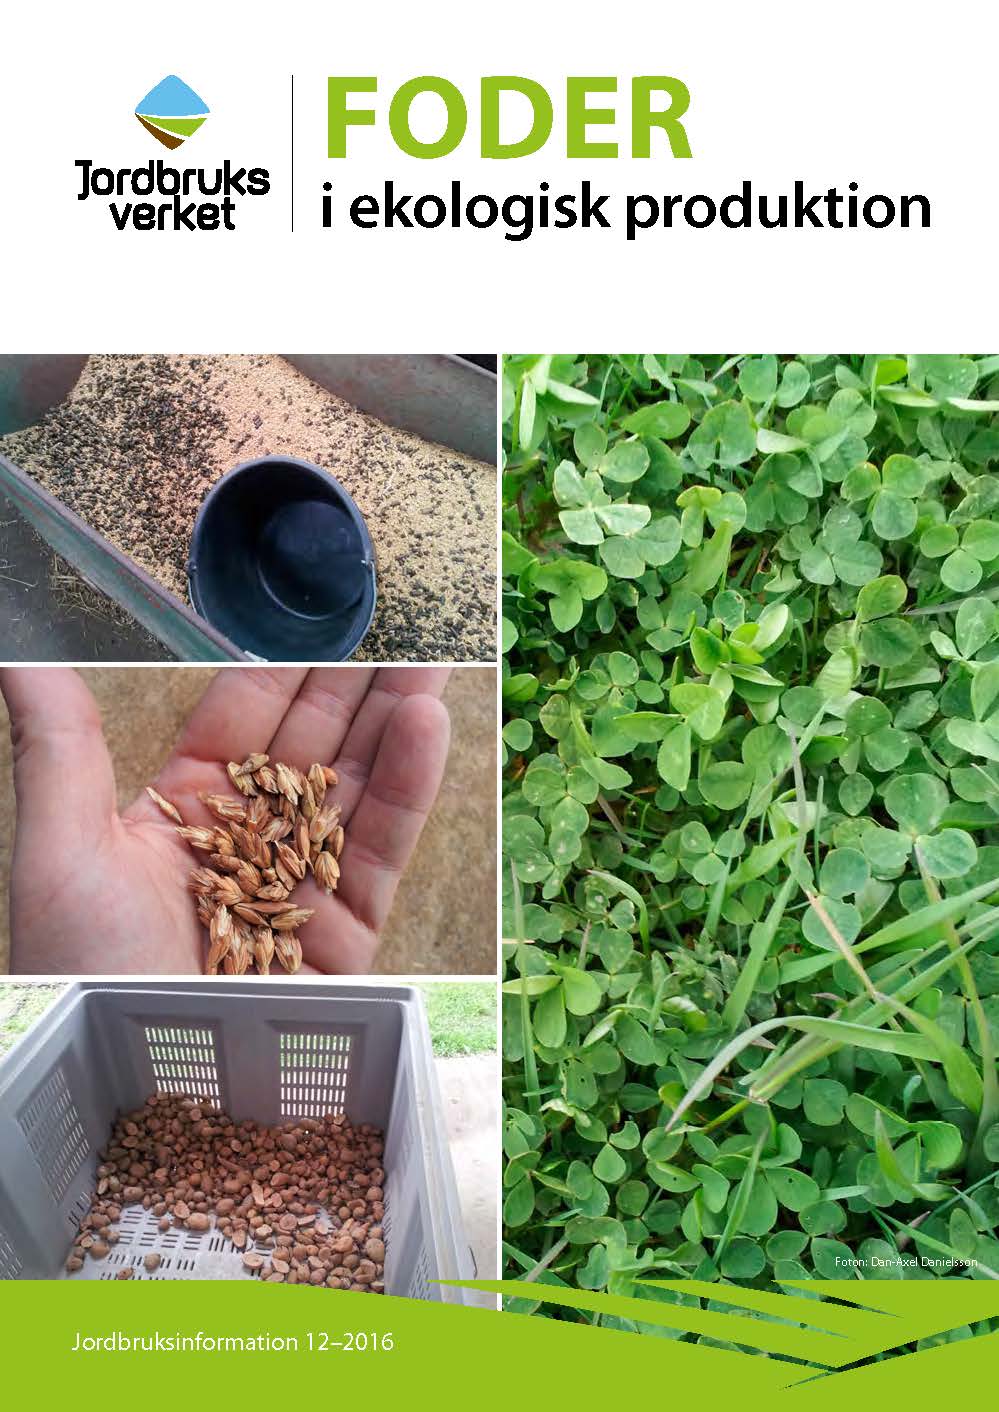 Feed in organic production